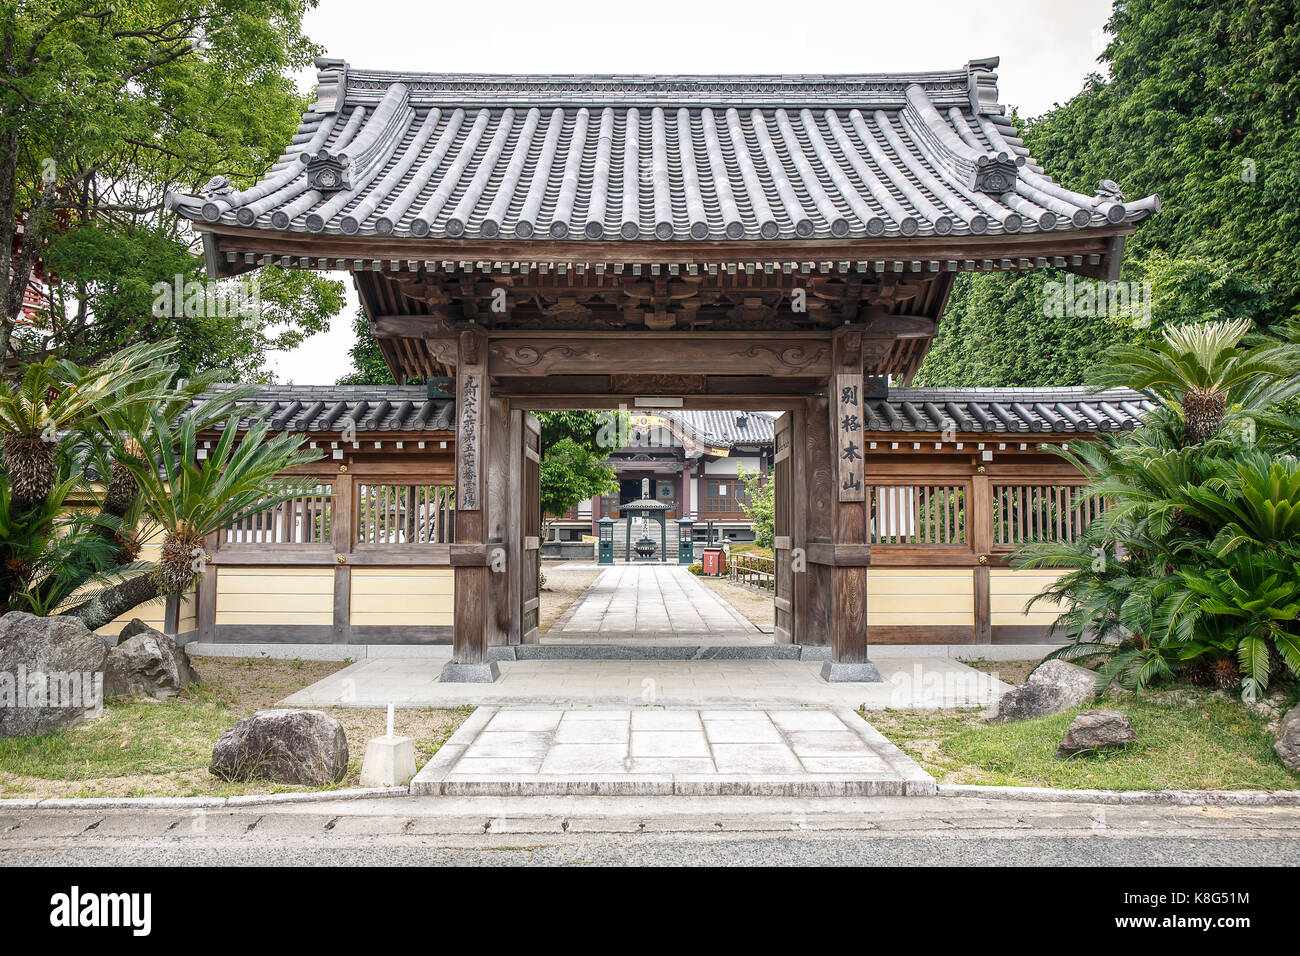 Kumamoto, Japan -June 17: Temple at Tamana district Kumamoto Prefecture It is one of the oldest places in Japan. With a long tradition of cultural her Stock Photo